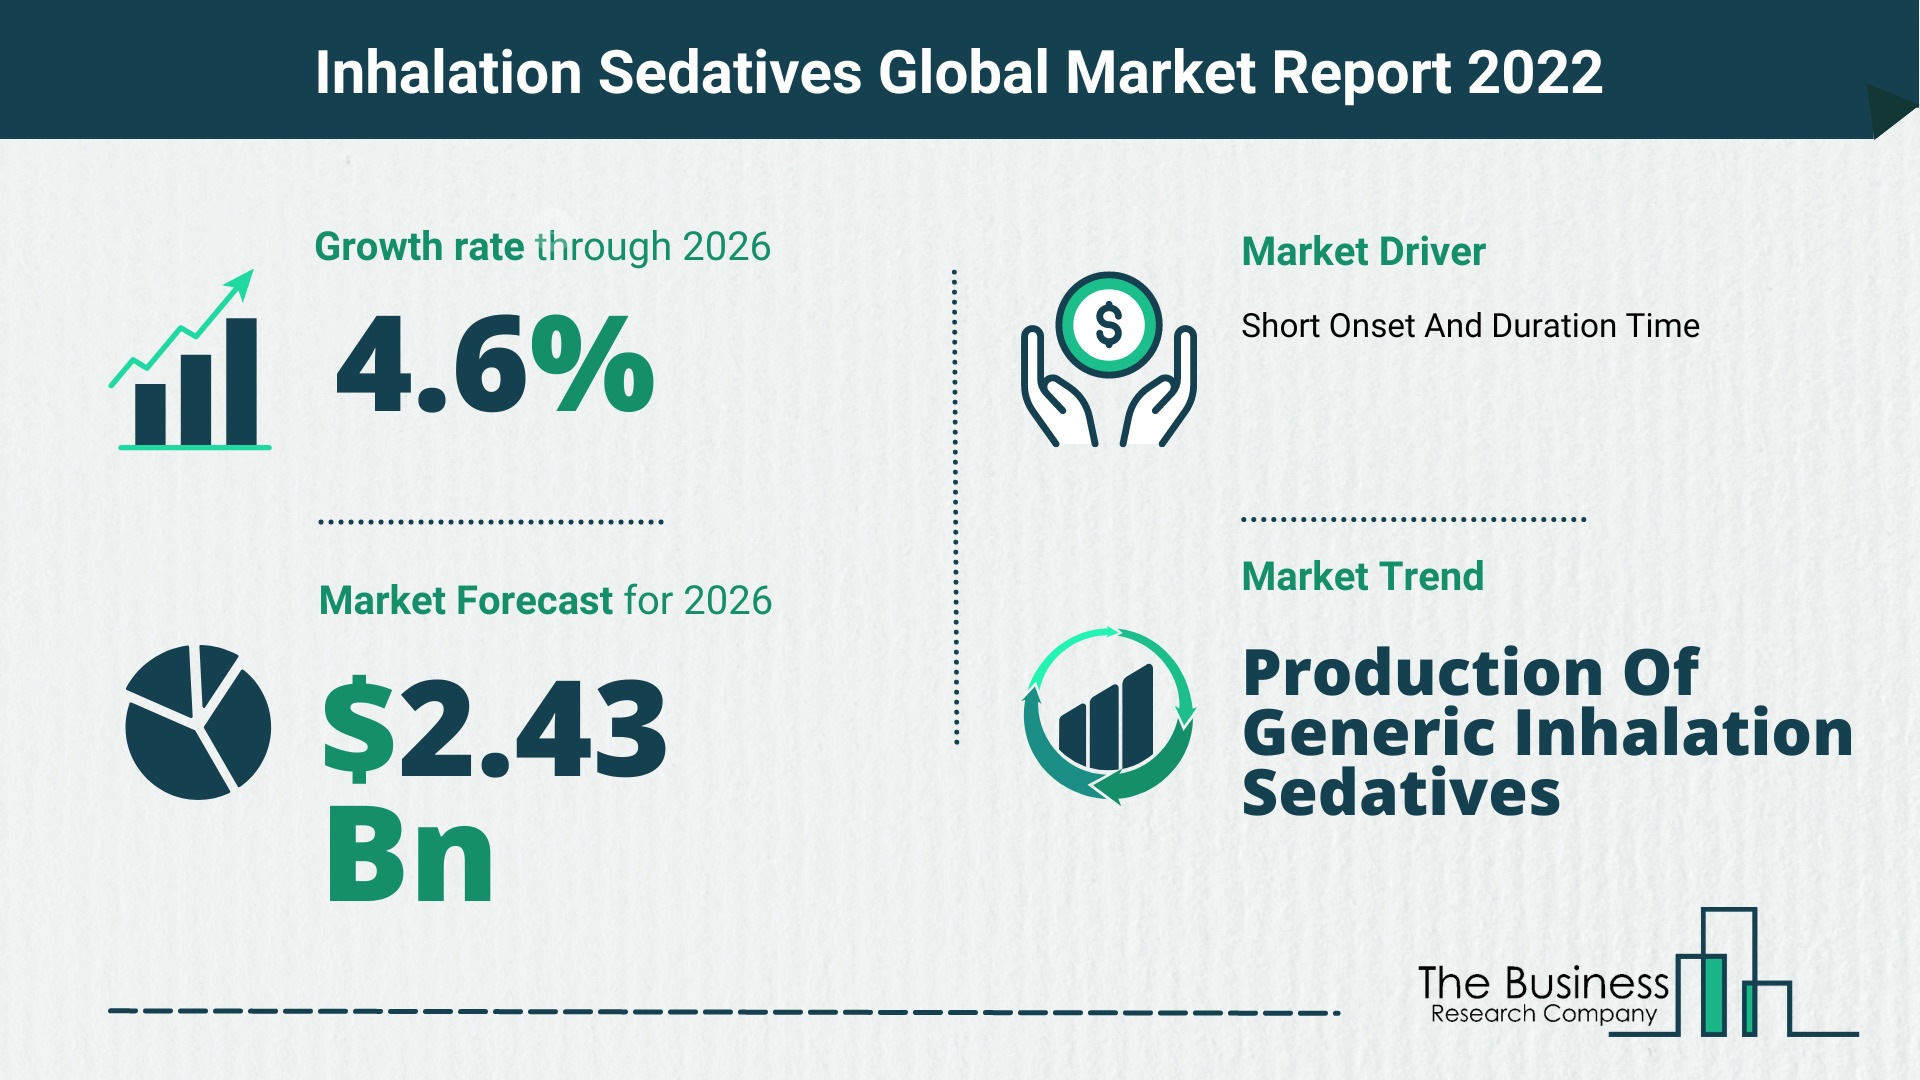 The Inhalation Sedatives Market Share, Market Size, And Growth Rate 2022